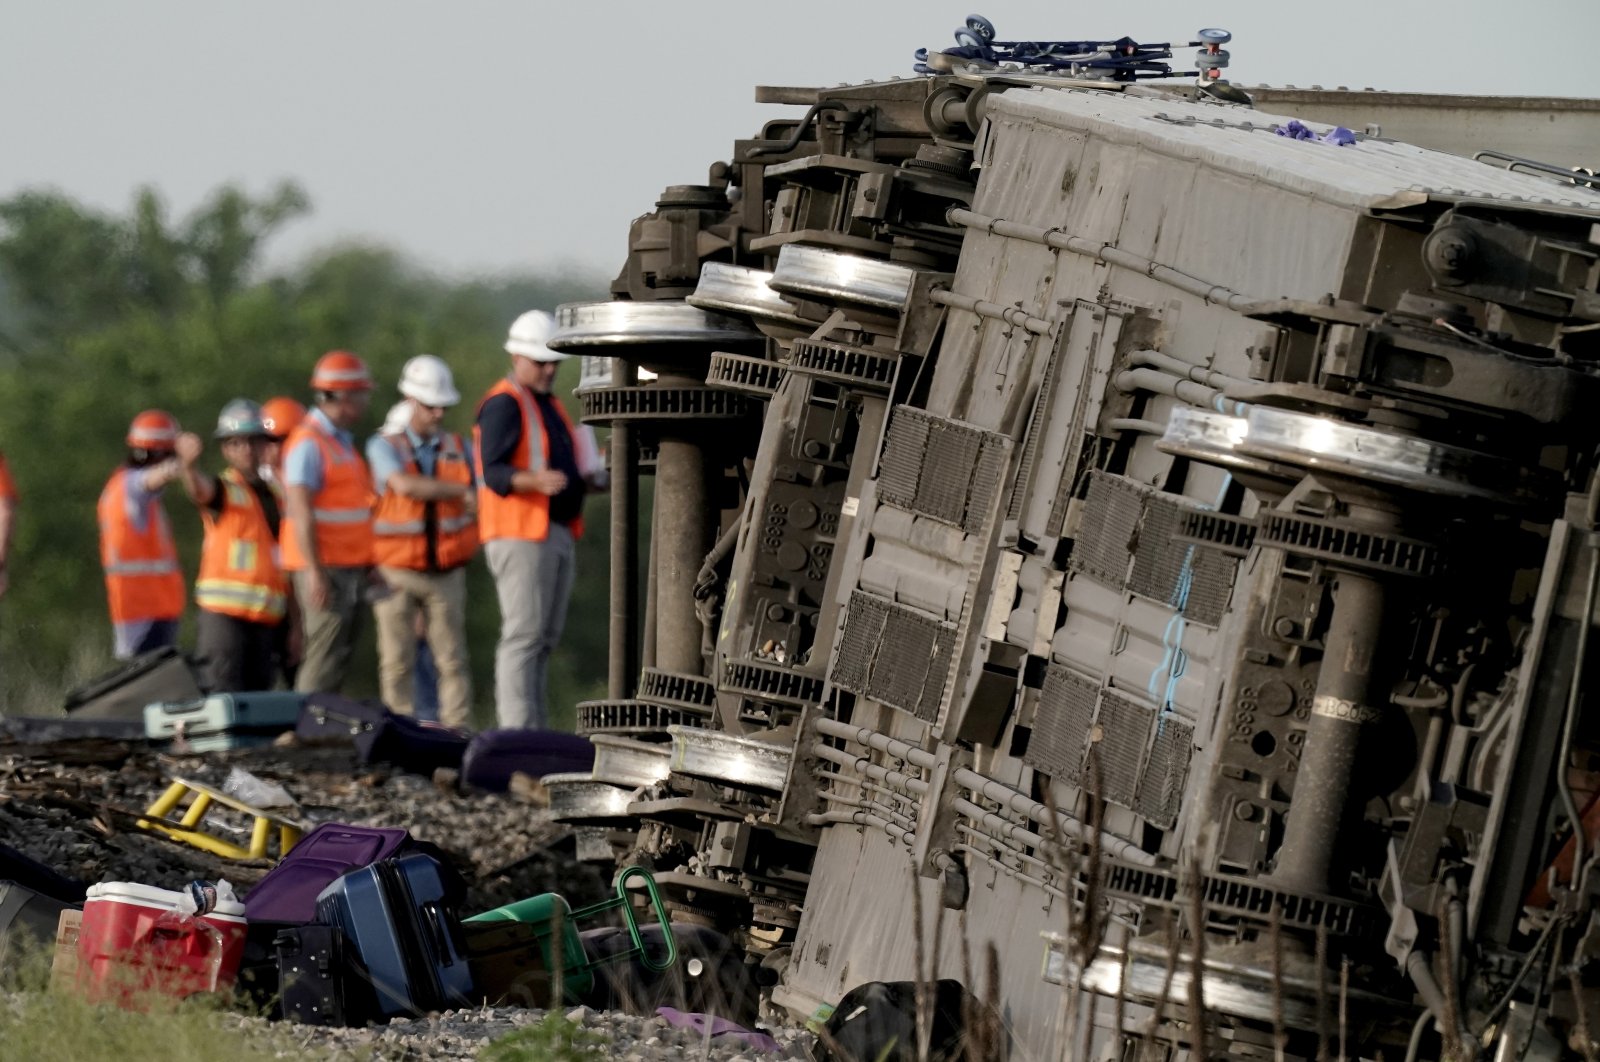 Workers inspect the scene of an Amtrak train which derailed after striking a dump truck, near Mendon, Missouri, U.S., June 27, 2022. (AP Photo)